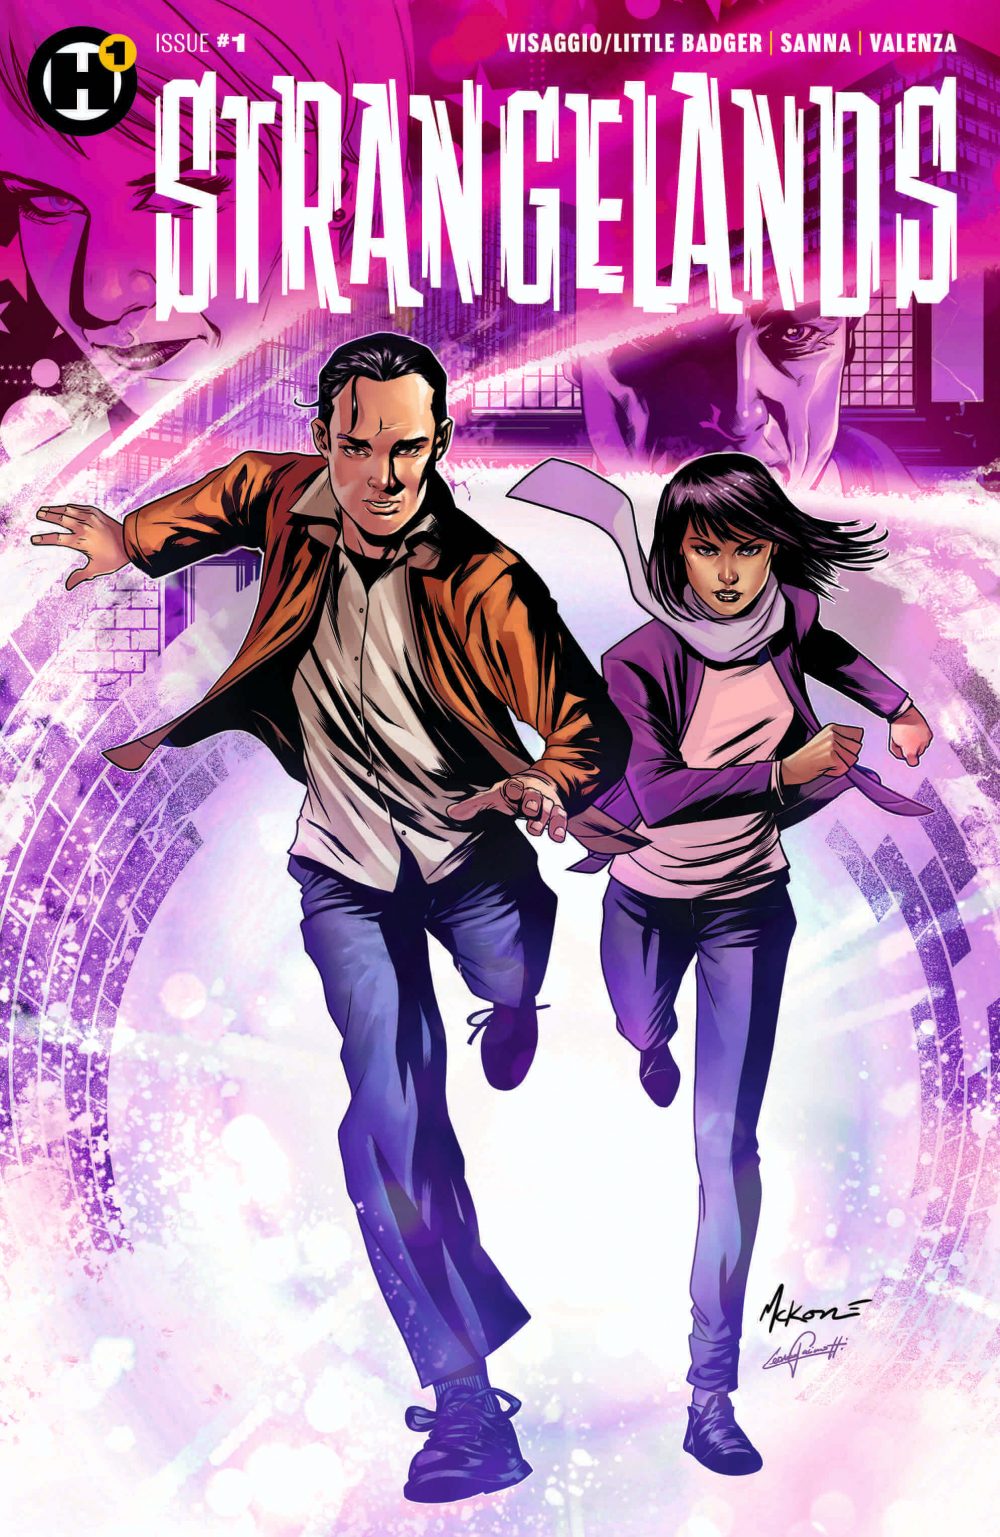 'Strangelands' #1 review: Full speed into the hyperkinetic love child of a rom-com and action flick